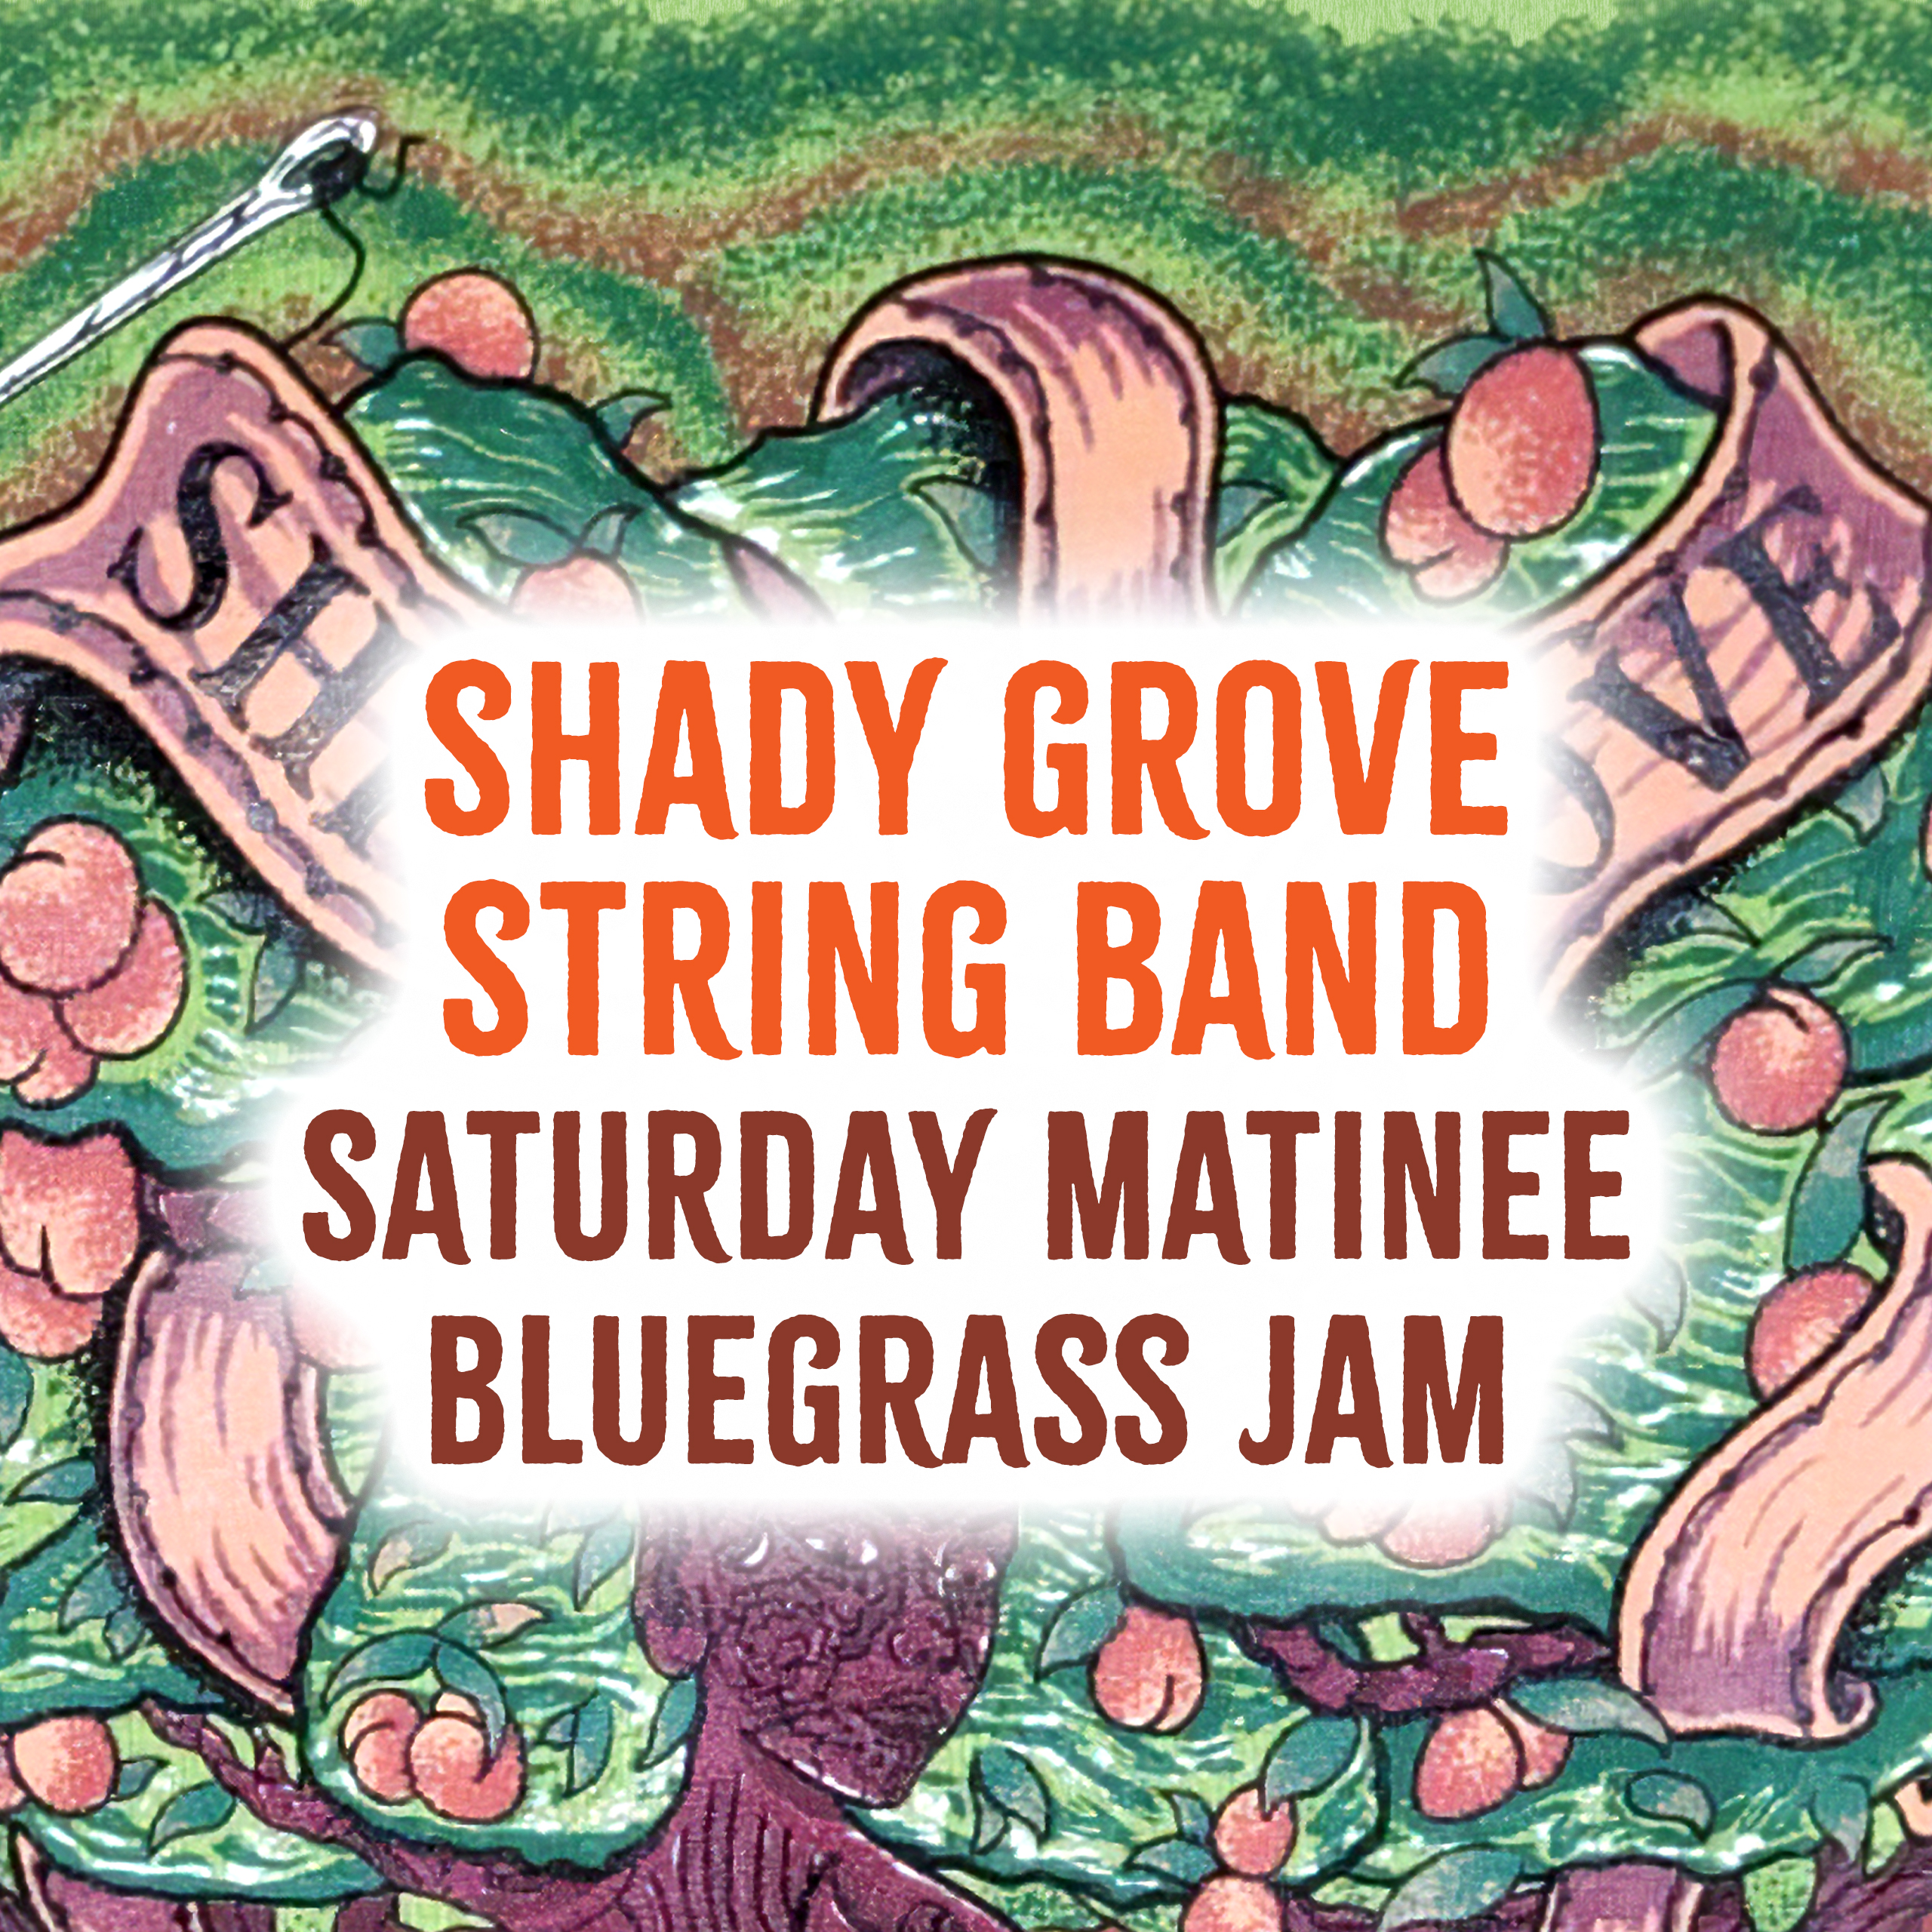 Shady Grove String Band: Billy Strings Weekend Saturday Matinee!